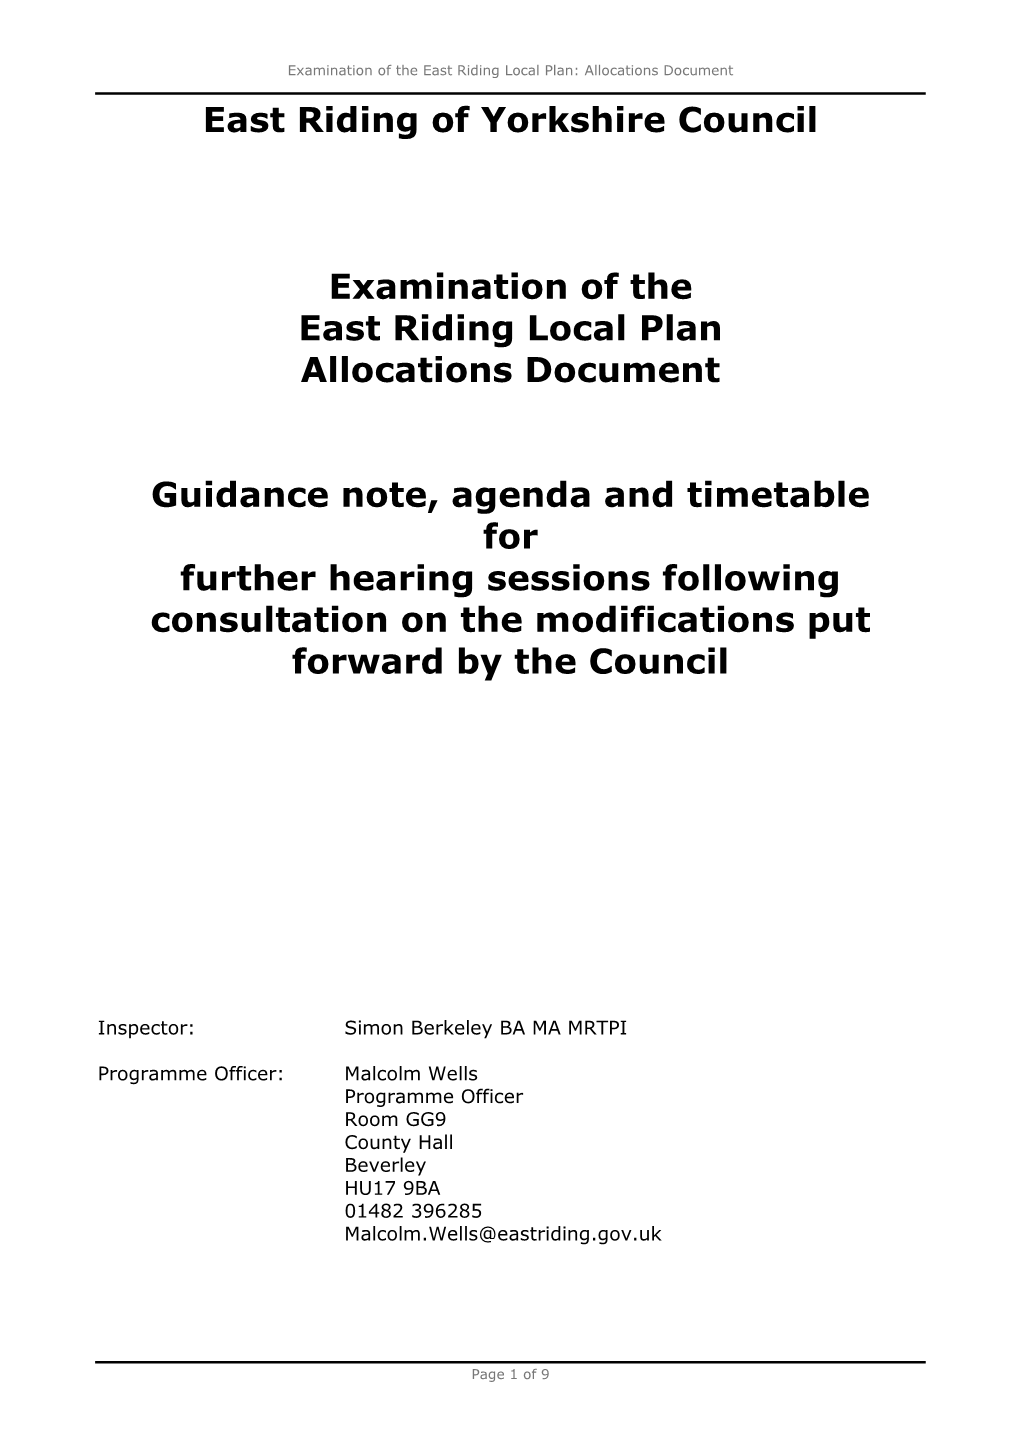 East Riding of Yorkshire Council Examination of the East Riding